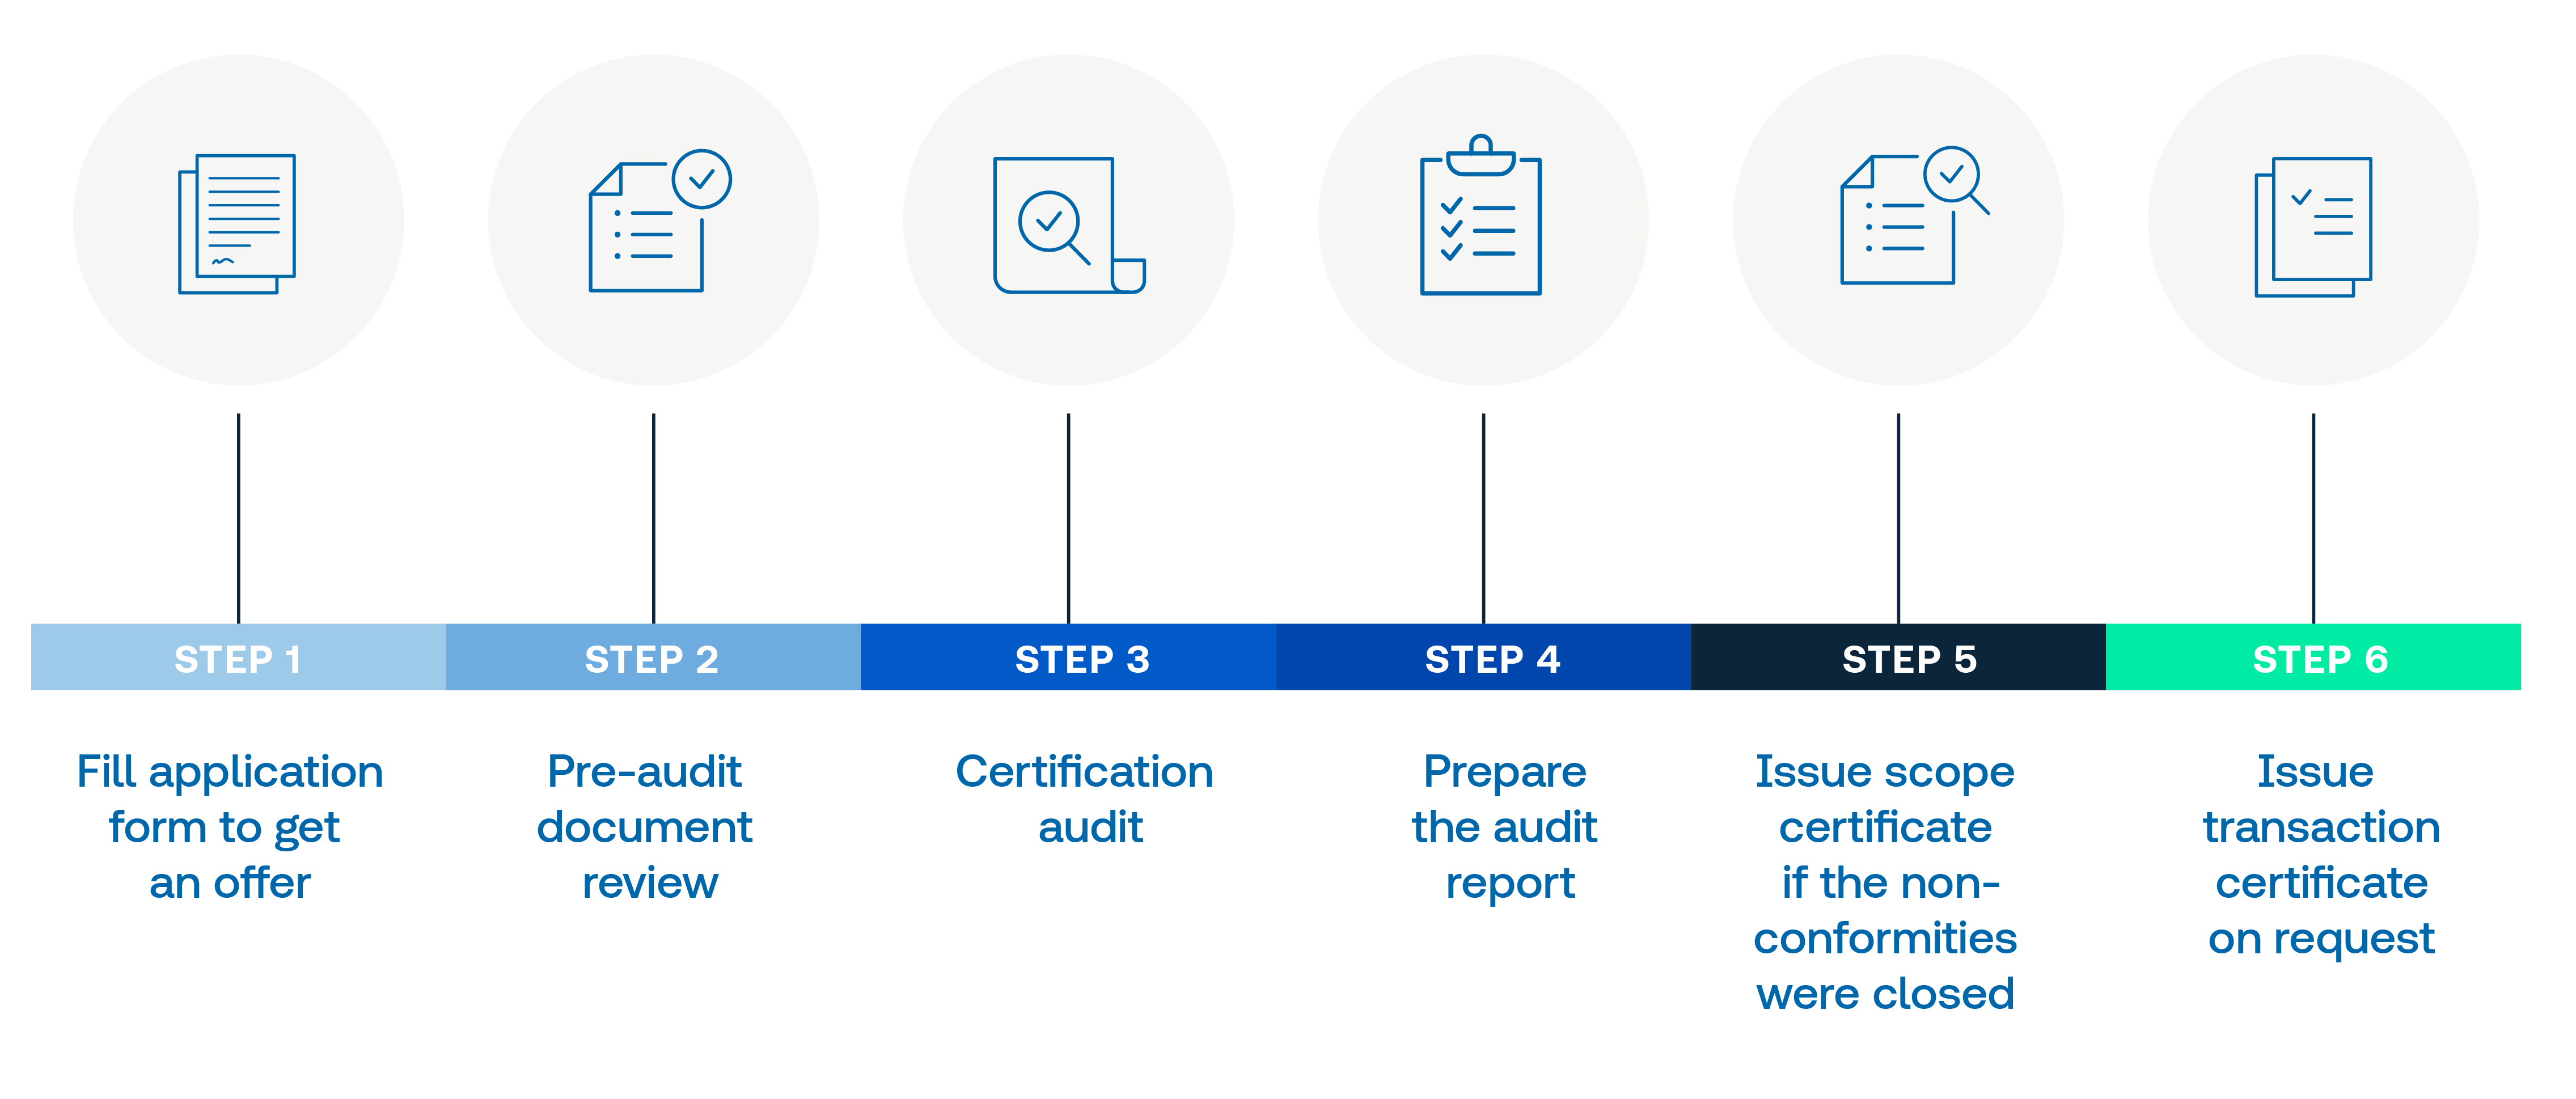 RCS AND GRS CERTIFICATION WORKFLOW